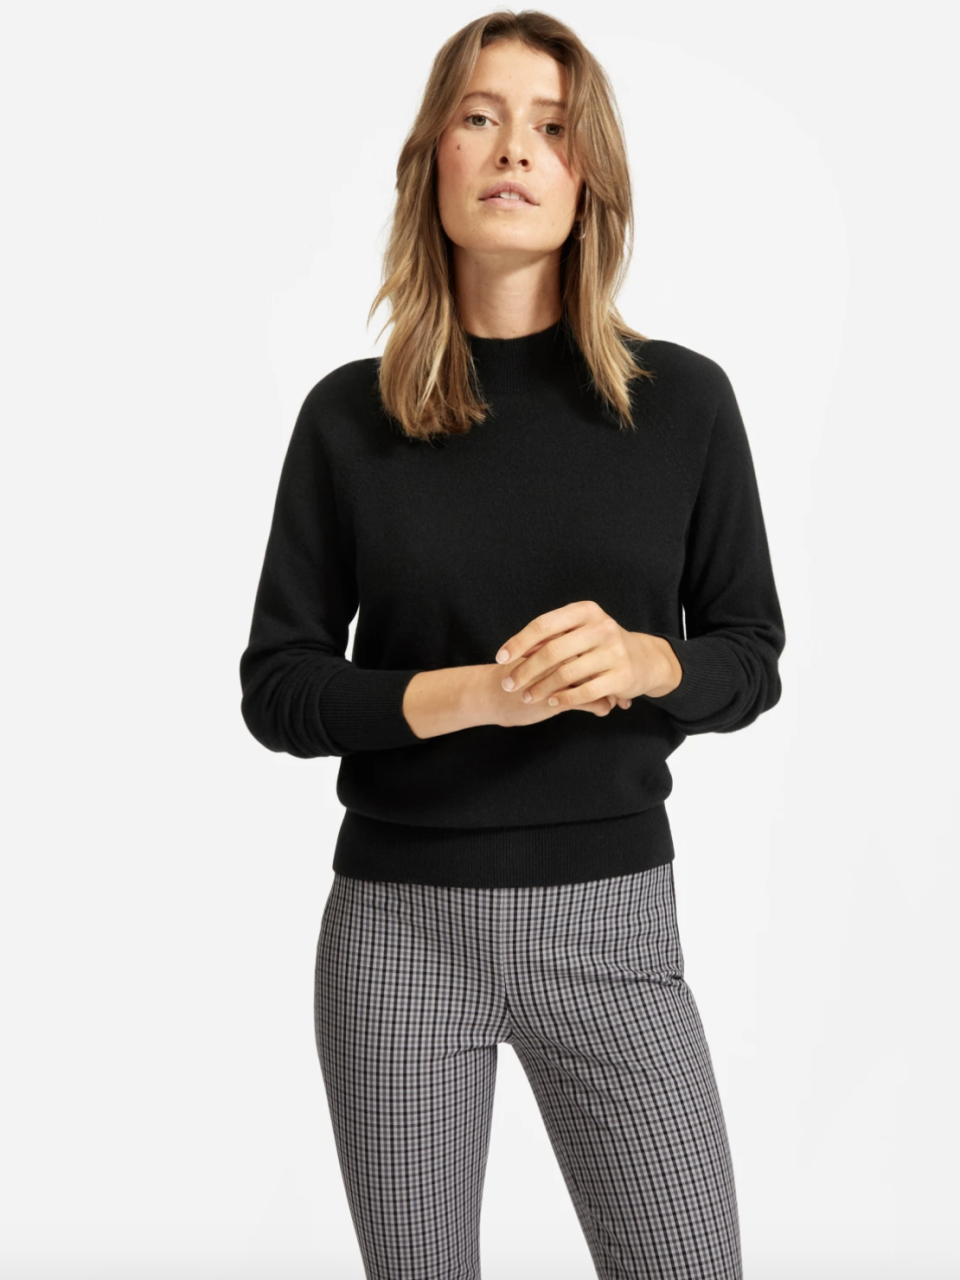 A relaxed raglan sleeve lends a sporty vibe to the otherwise classic fit. (Photo: Everlane)